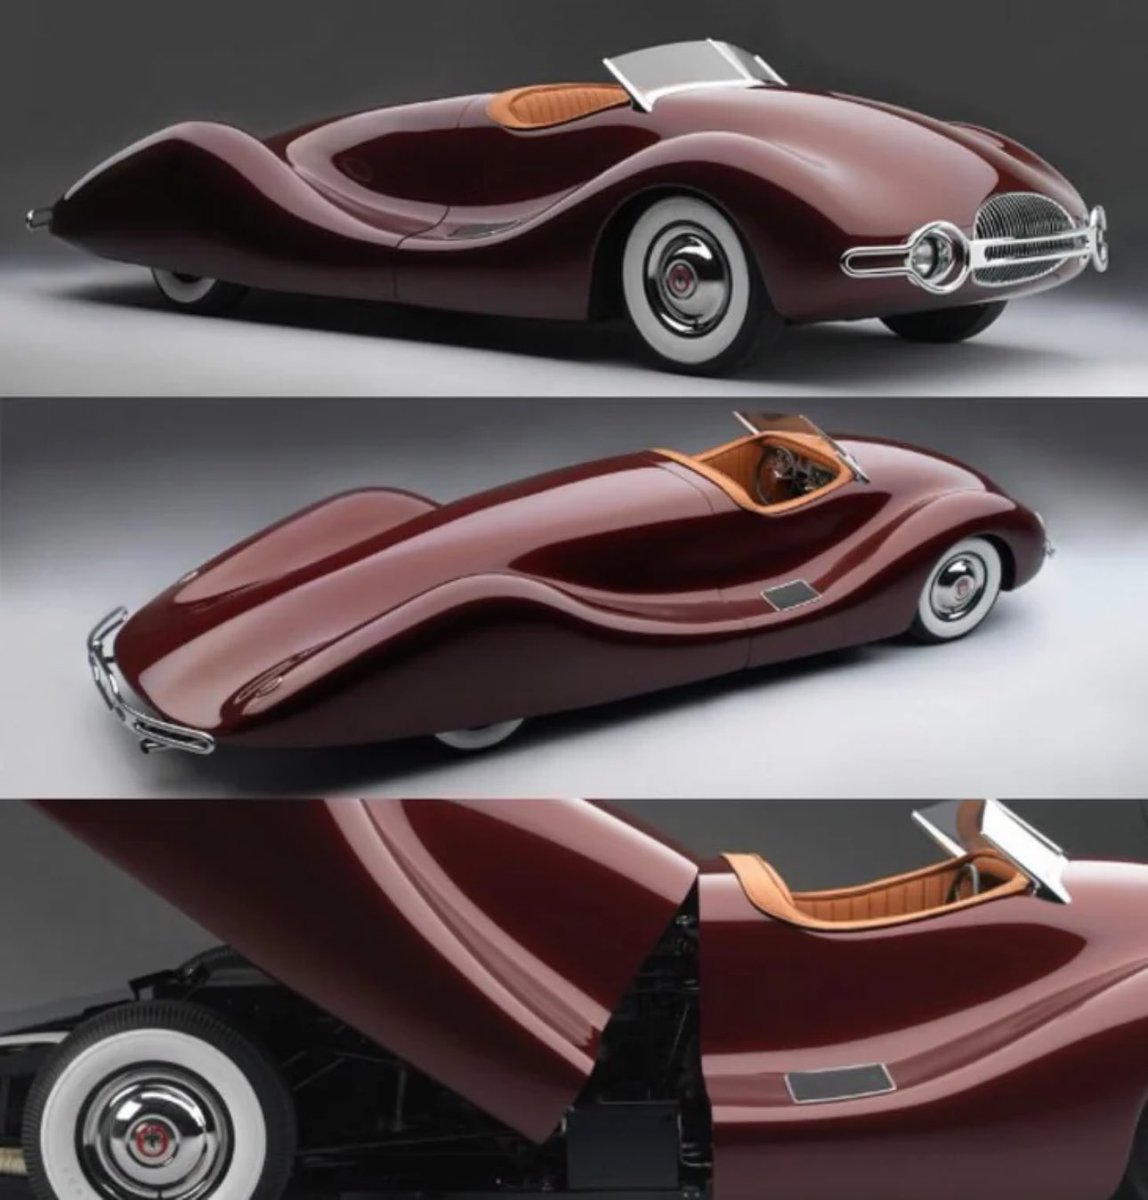 The 1948 Buick Streamliner.